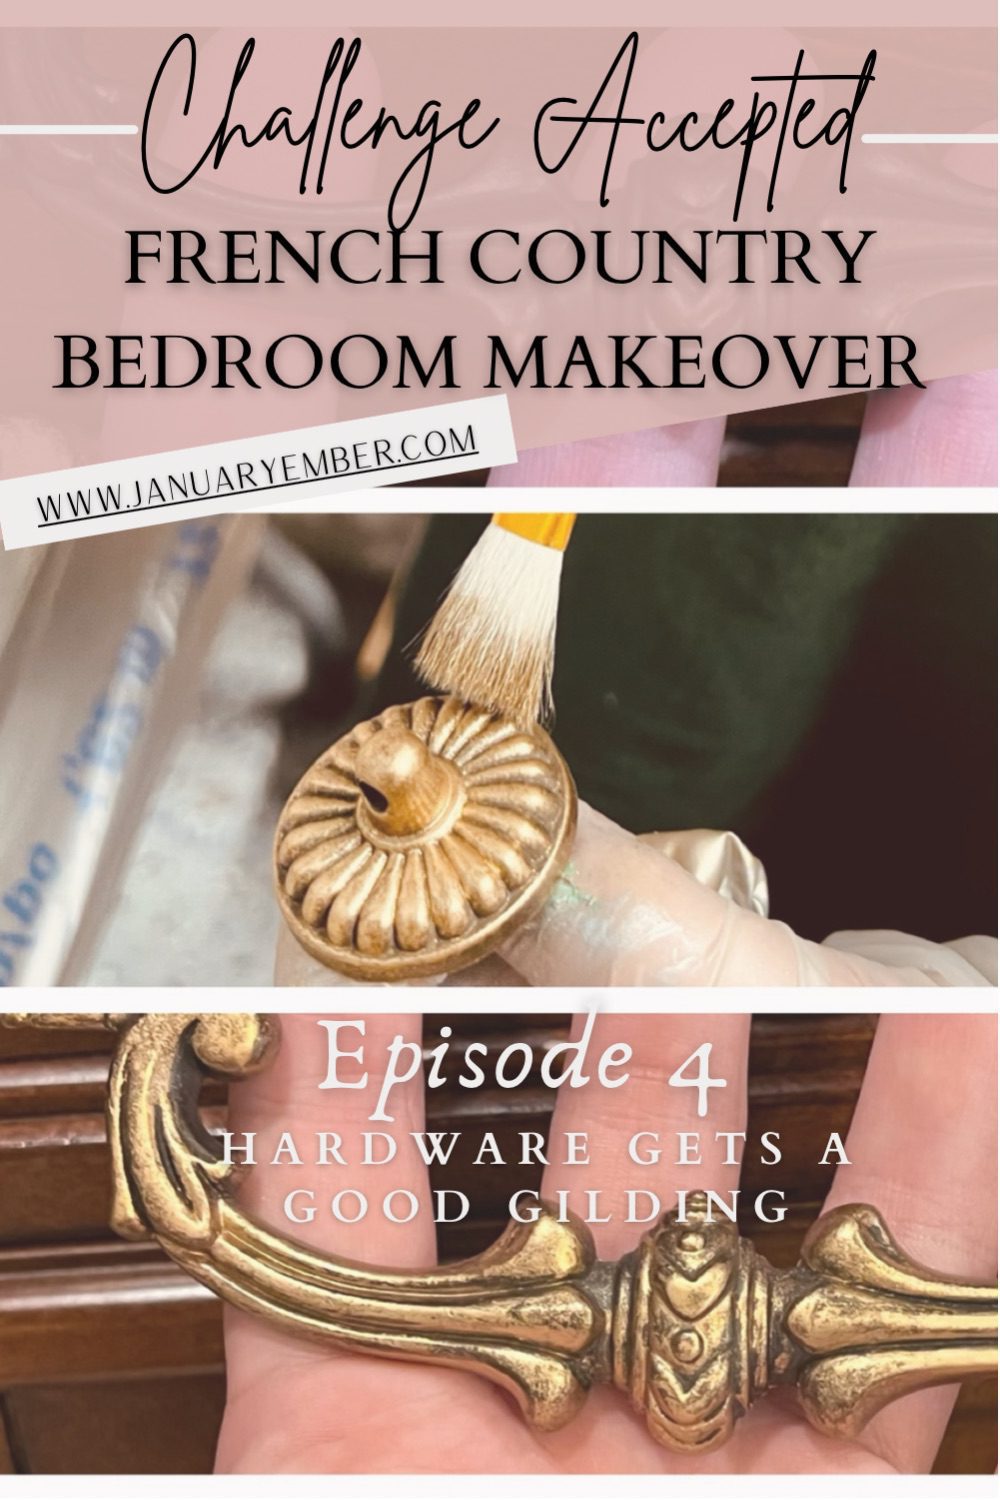 French Country Bedroom Makeover Ep 4 Gilding wax on Hardware